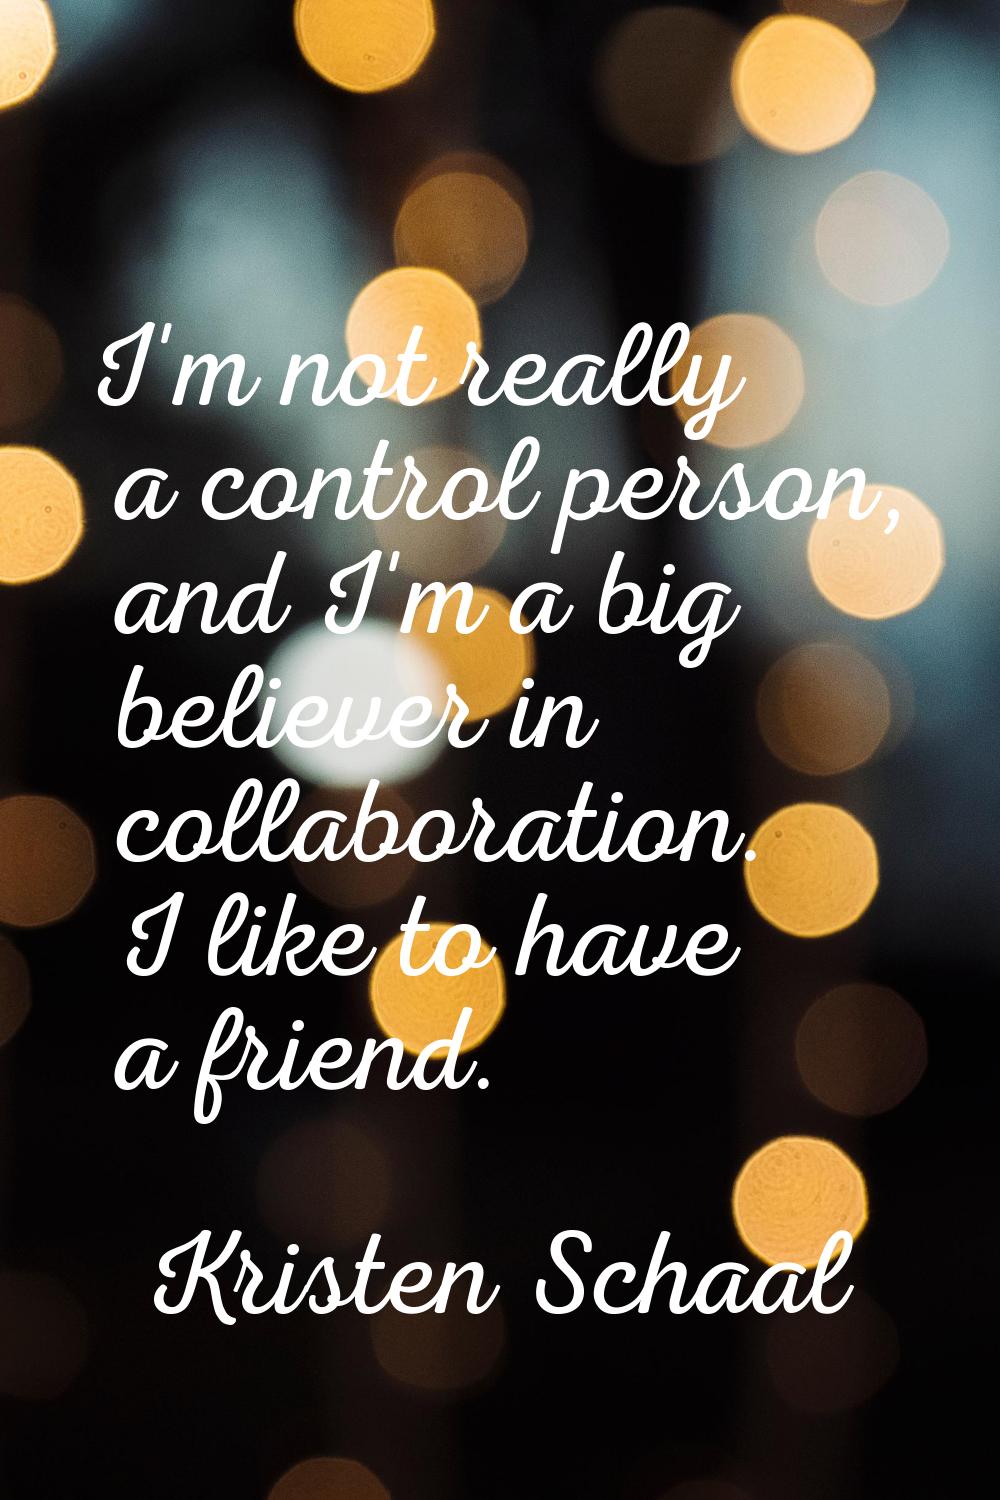 I'm not really a control person, and I'm a big believer in collaboration. I like to have a friend.